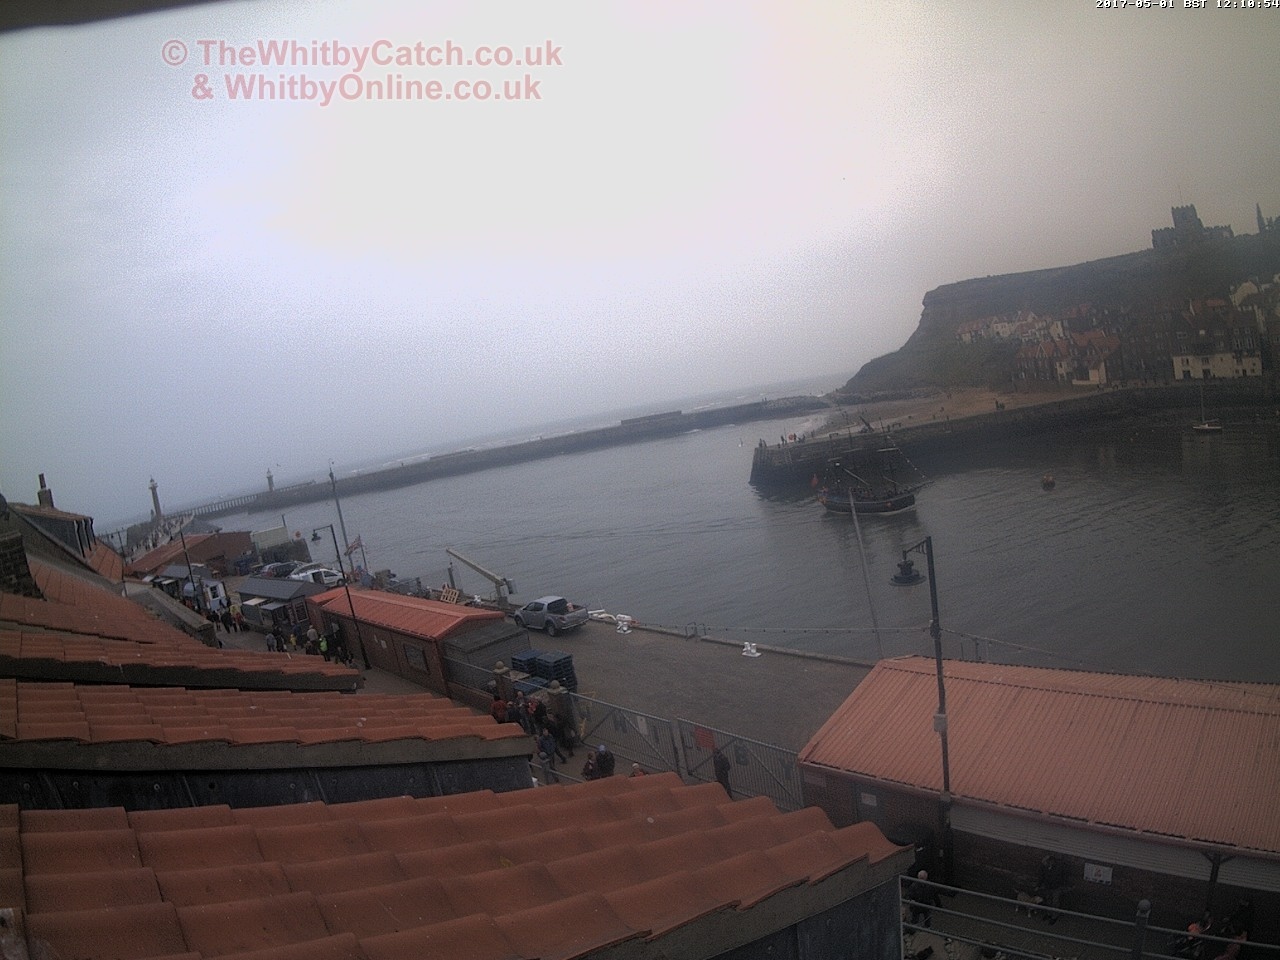 Whitby Mon 1st May 2017 12:11.